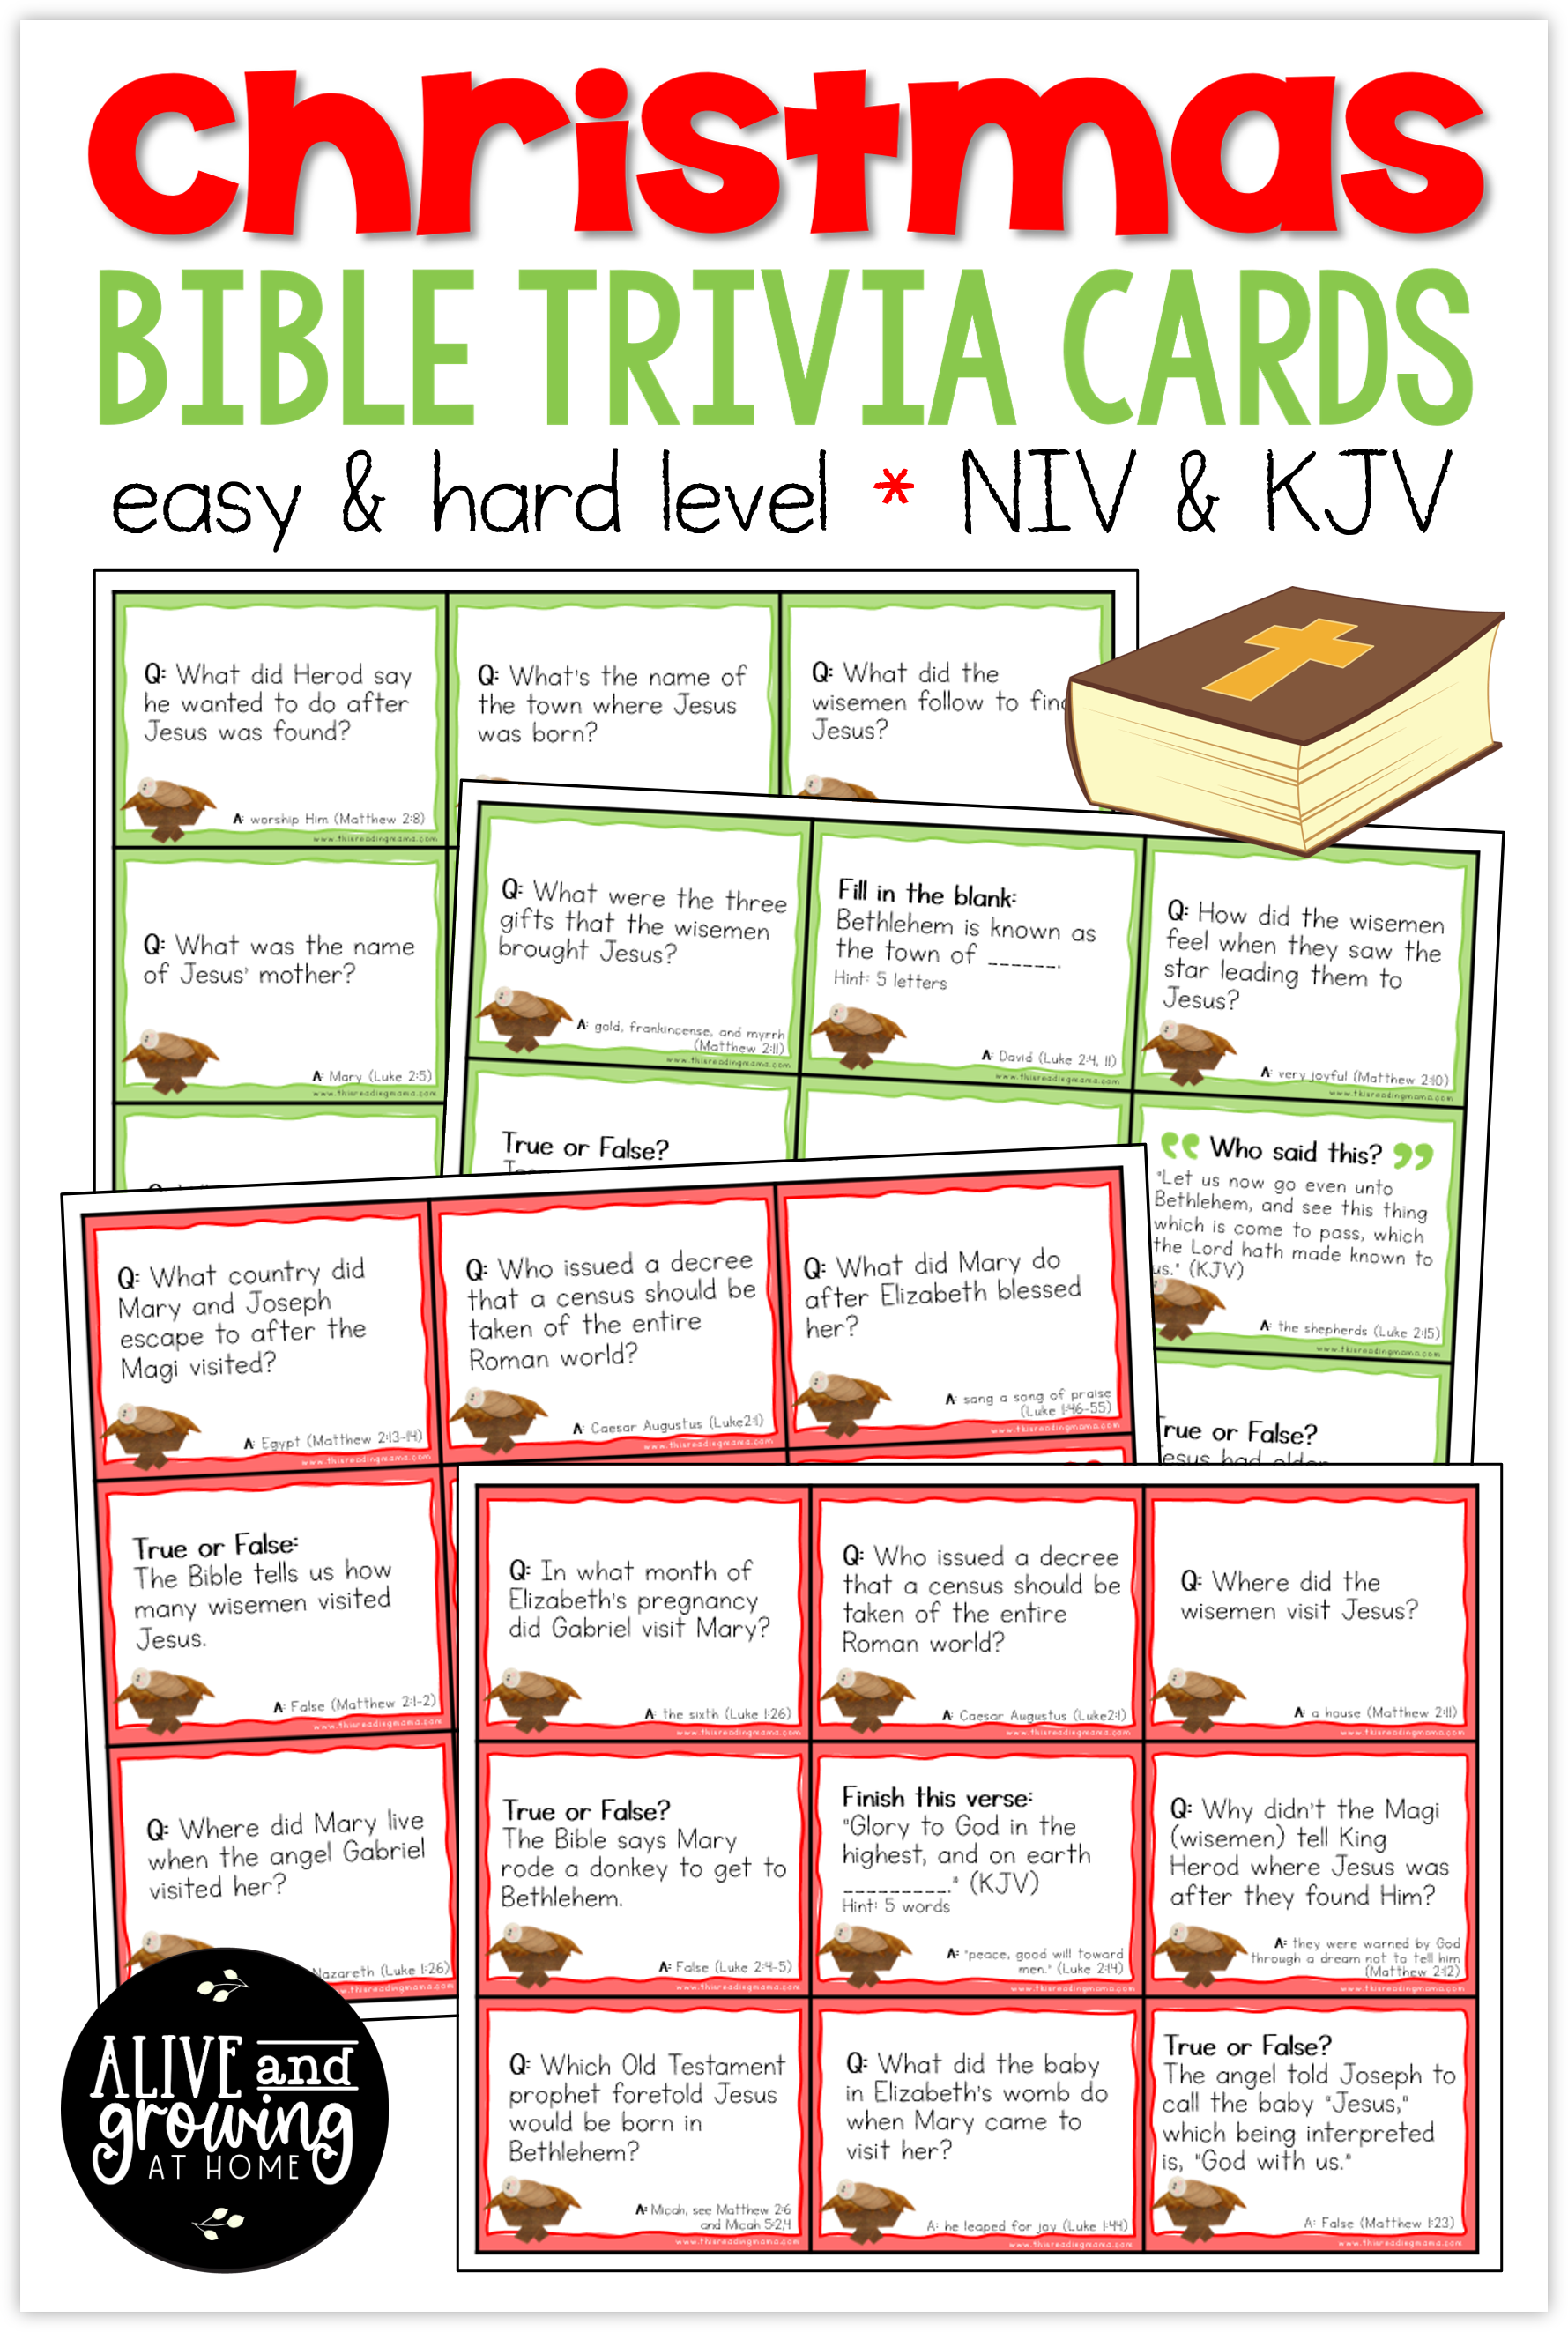 christmas-bible-trivia-cards-alive-and-growing-at-home